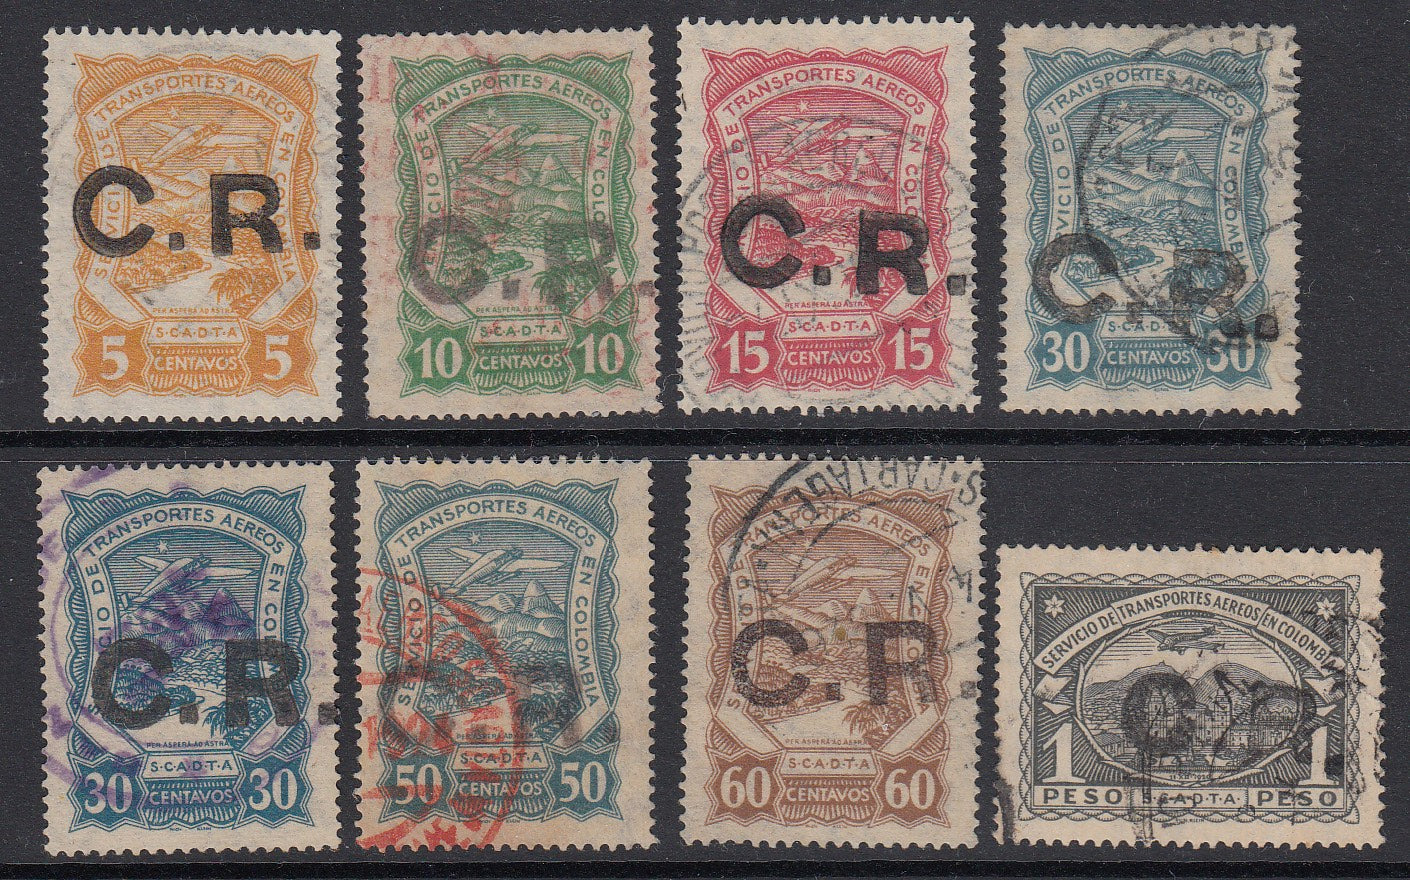 Colombia SCADTA 1923 Costa Rica Airmail Overprints Short Set to 1p Used. Scott CLCR1-CLCR8